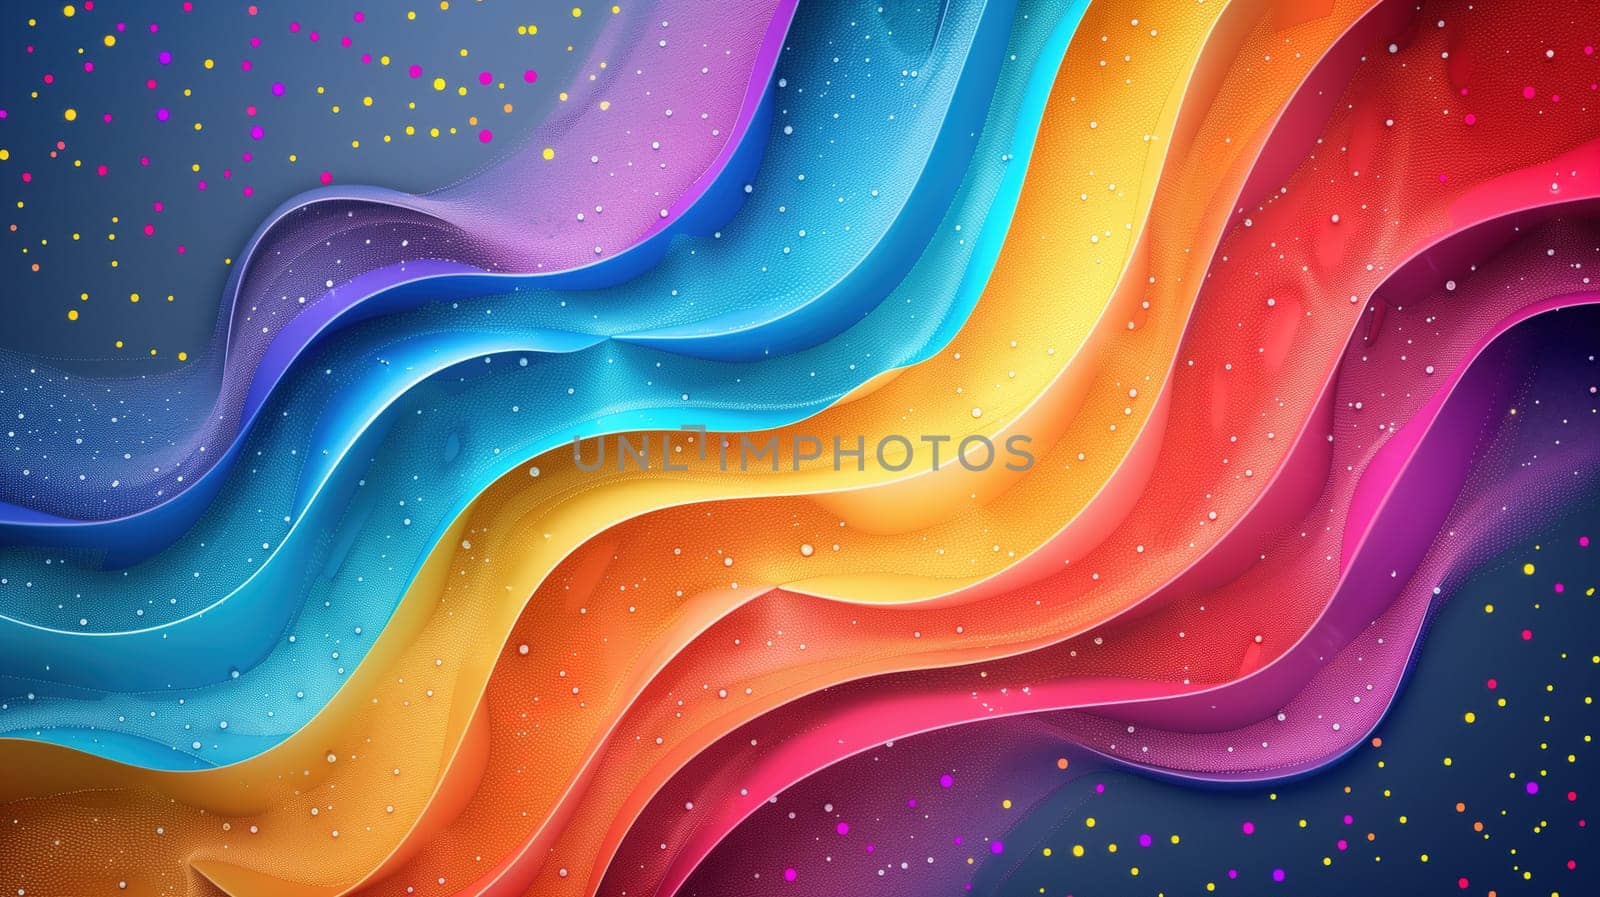 An array of vivid, undulating ribbons of color flow across the frame, symbolizing LGBT pride with their rainbow hues that merge and contrast beautifully on a speckled, starry backdrop, creating a sense of movement and celebration.